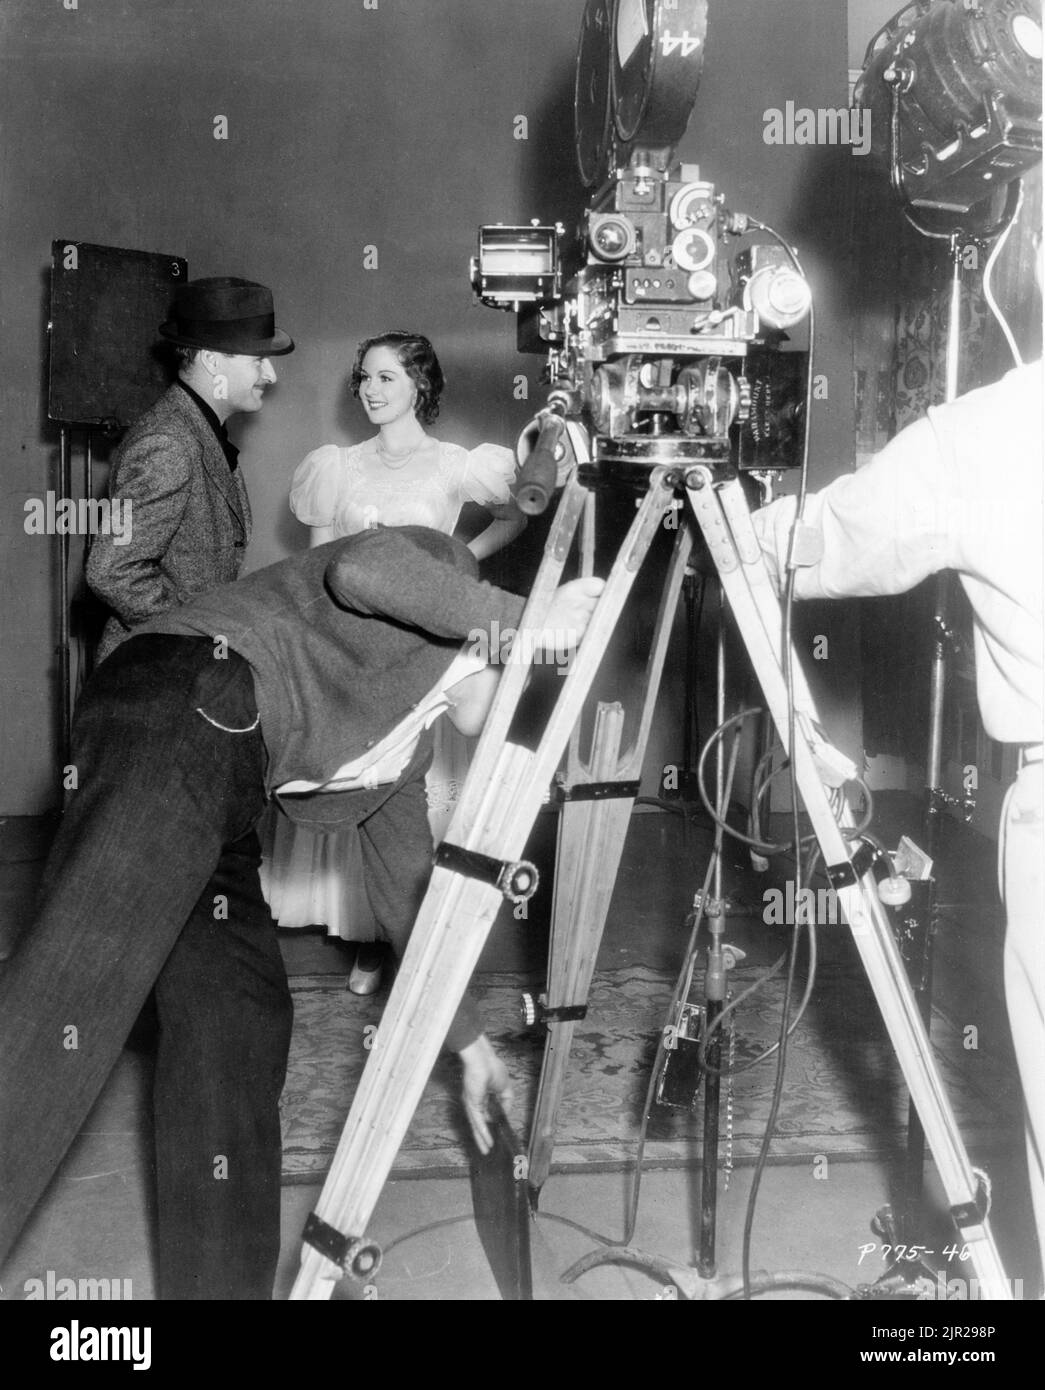 Director WILLIAM A. WELLMAN with actress SUSAN HAYWARD on set candid during her successful screen test for the role of Isobel Rivers opposite Gary Cooper in BEAU GESTE 1939 director WILLIAM A. WELLMAN novel P.C. Wren Paramount Pictures Corporation Stock Photo